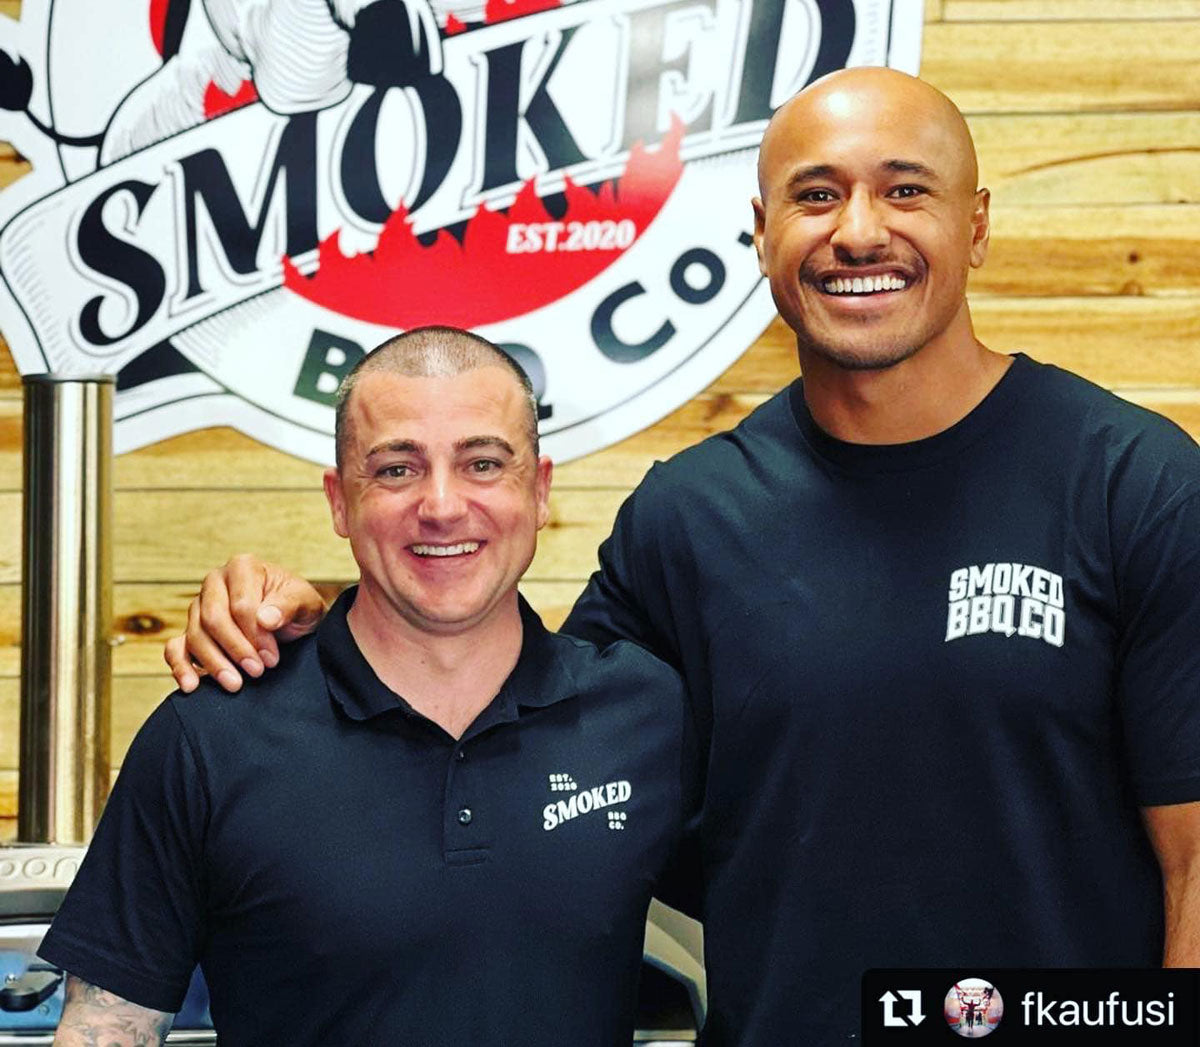 Trent Barret Smoked BBQ Co owner, and Felise Kaufusi from the Dolphins NRL team @fkaufusi